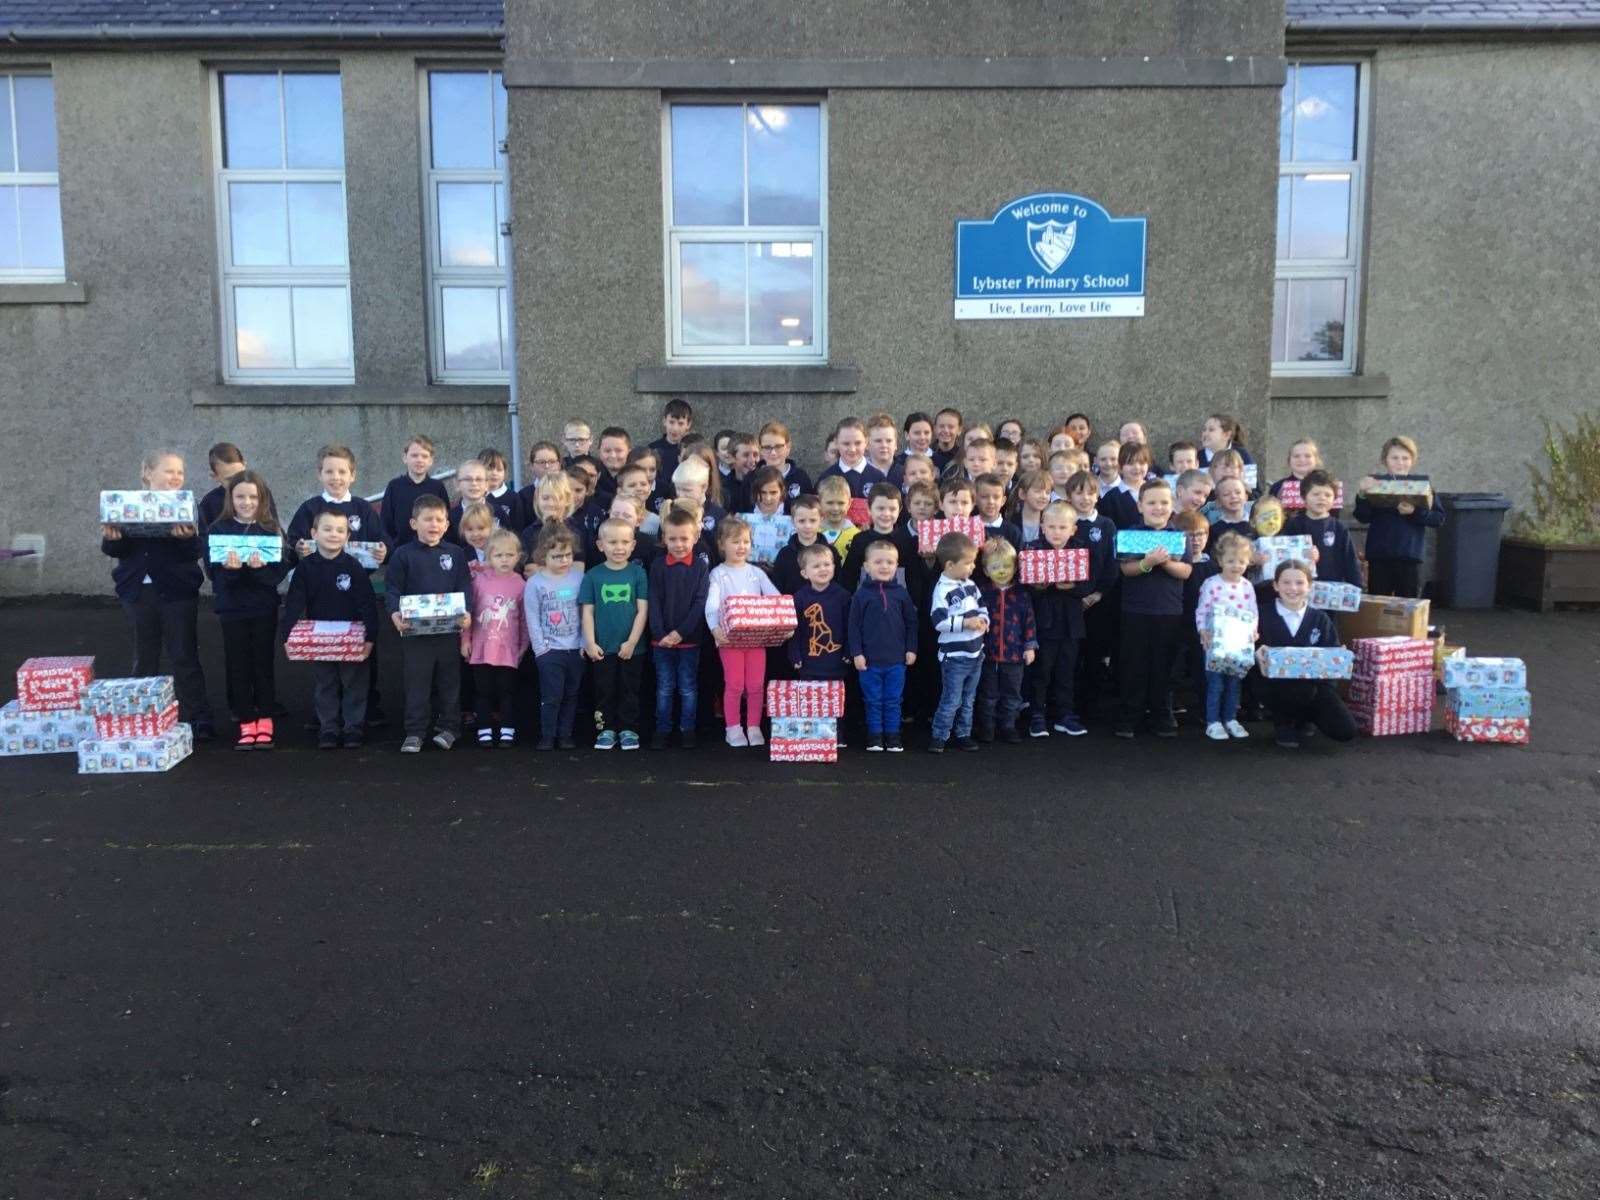 Children at Lybster school waiting for GMR Henderson to come and pick up the shoeboxes for transportation to Romania.